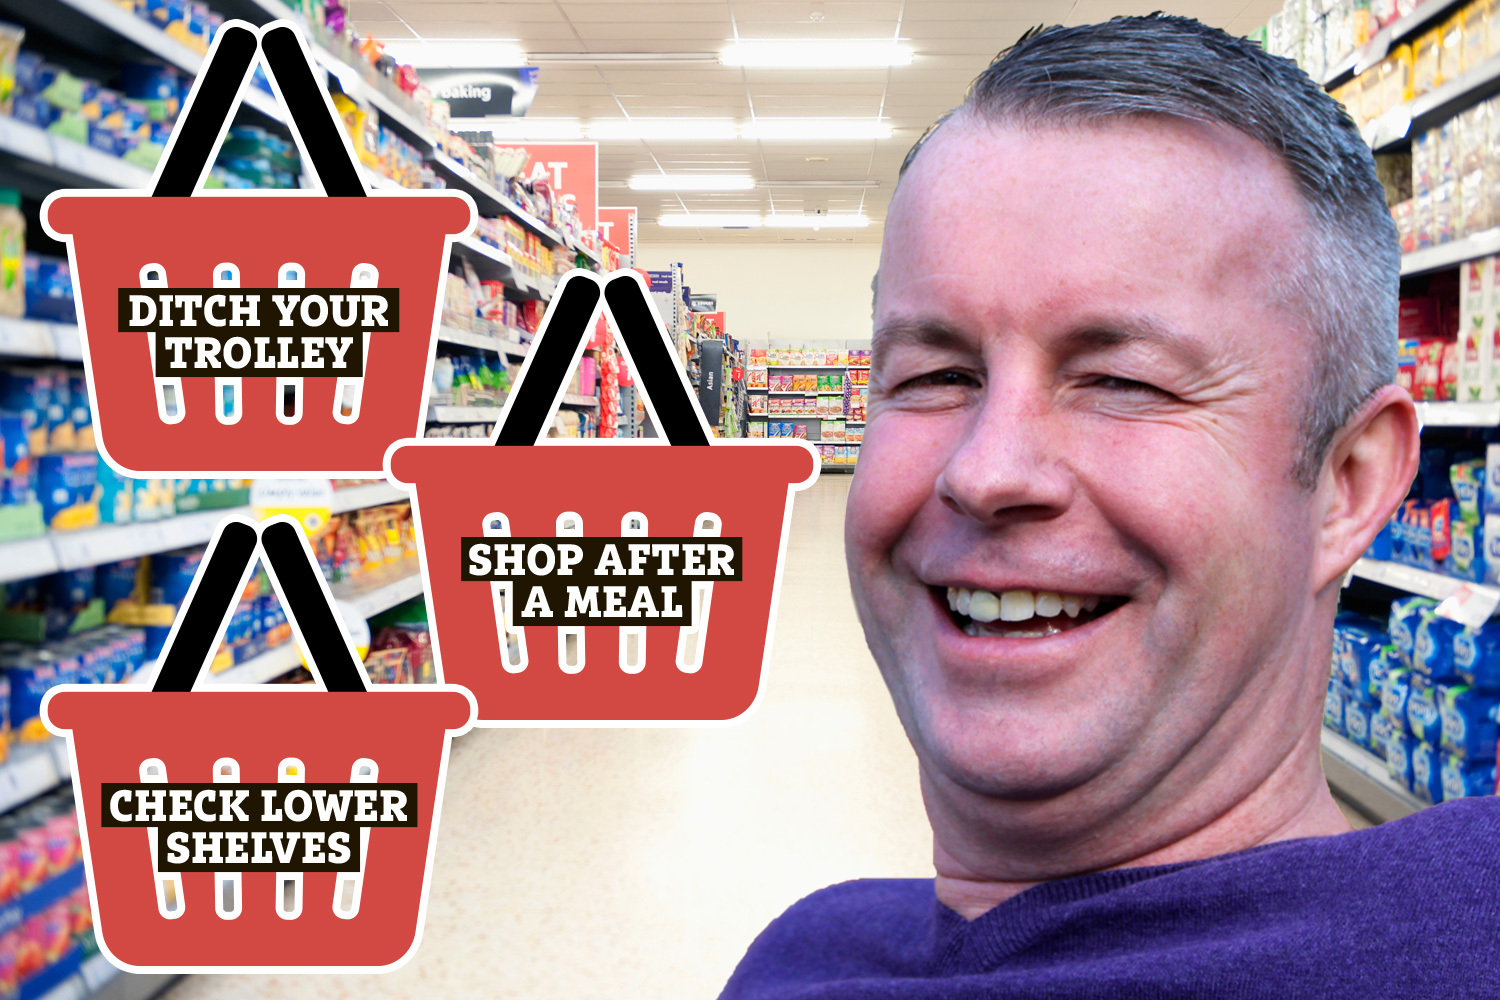 Some social media hacks will help you save at the supermarket